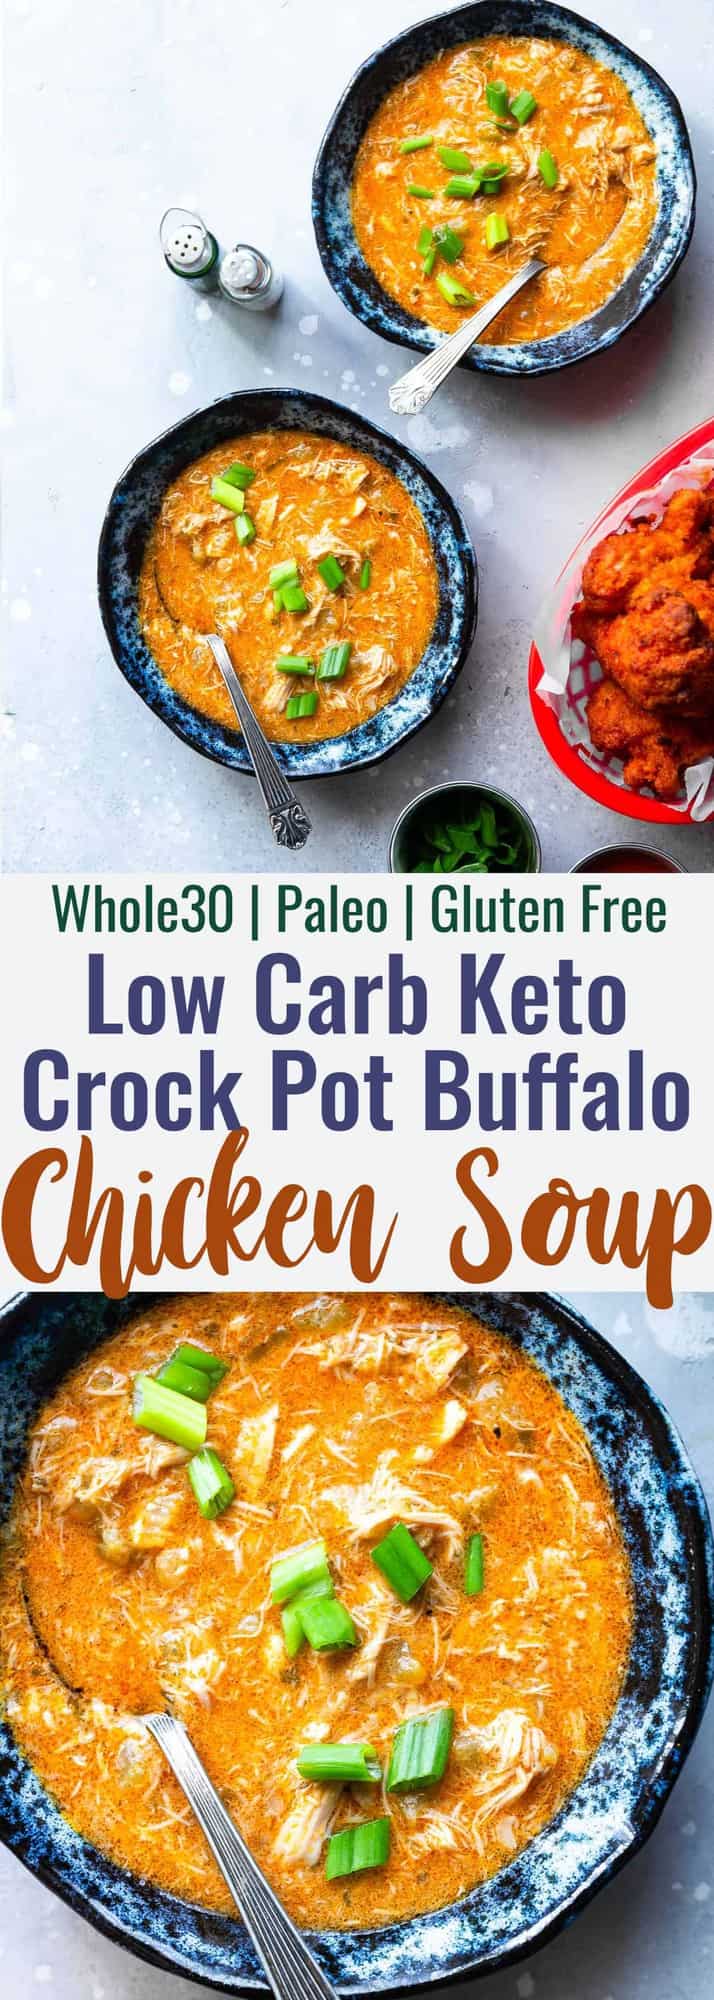 Crock Pot Low Carb Buffalo Chicken Soup - This easy, slow cooker Buffalo Chicken Soup basically makes itself! It's a gluten/grain/dairy and sugar free meal that is paleo and whole30 compliant too! Even picky eaters will love it! | #Foodfaithfitness | #Glutenfree #Paleo #Whole30 #Keto #Lowcarb